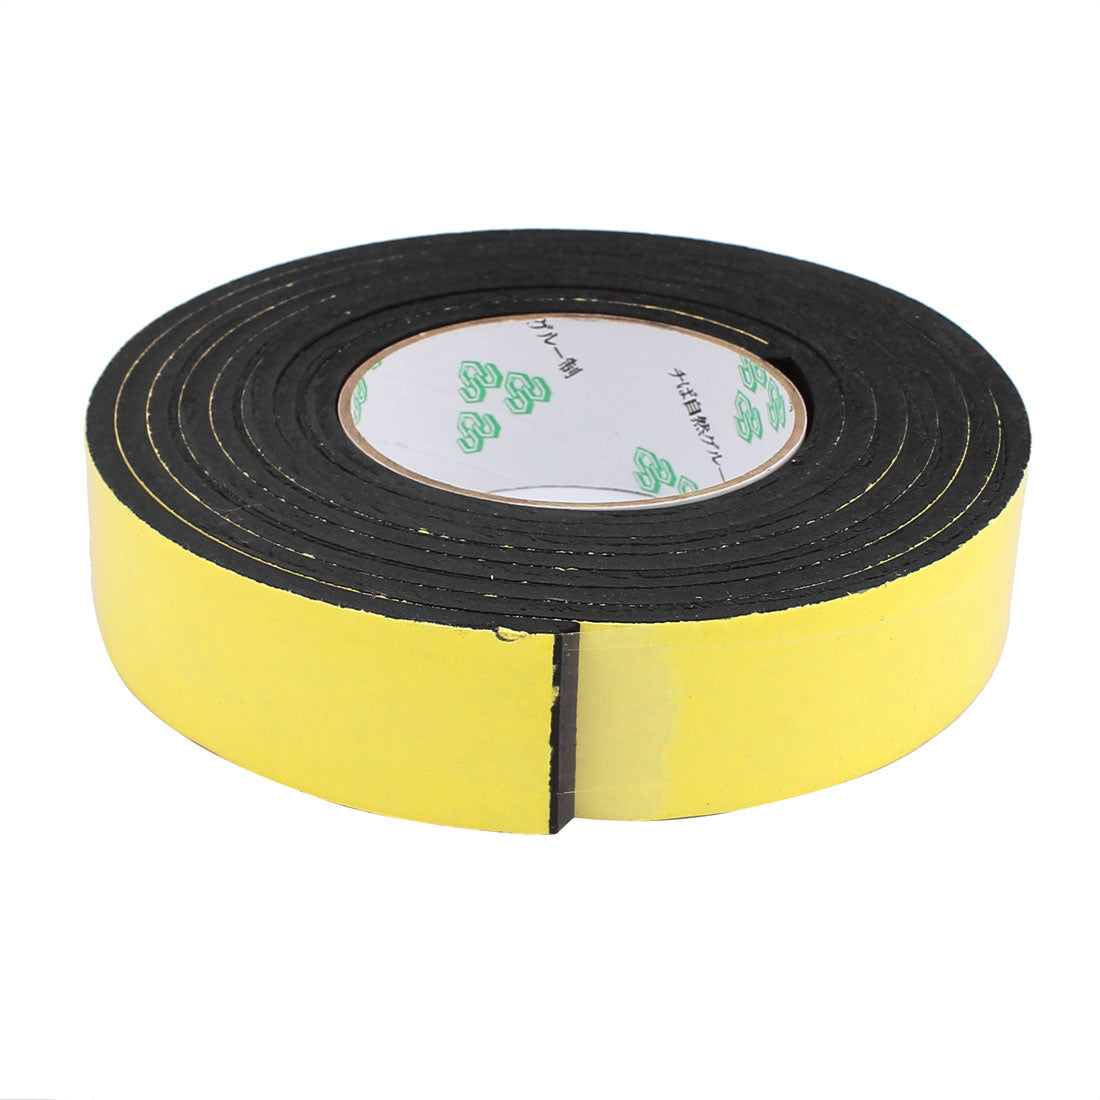 uxcell Uxcell 35mm x 5mm Single Sided Self Adhesive Shockproof Sponge Foam Tape 3 Meters